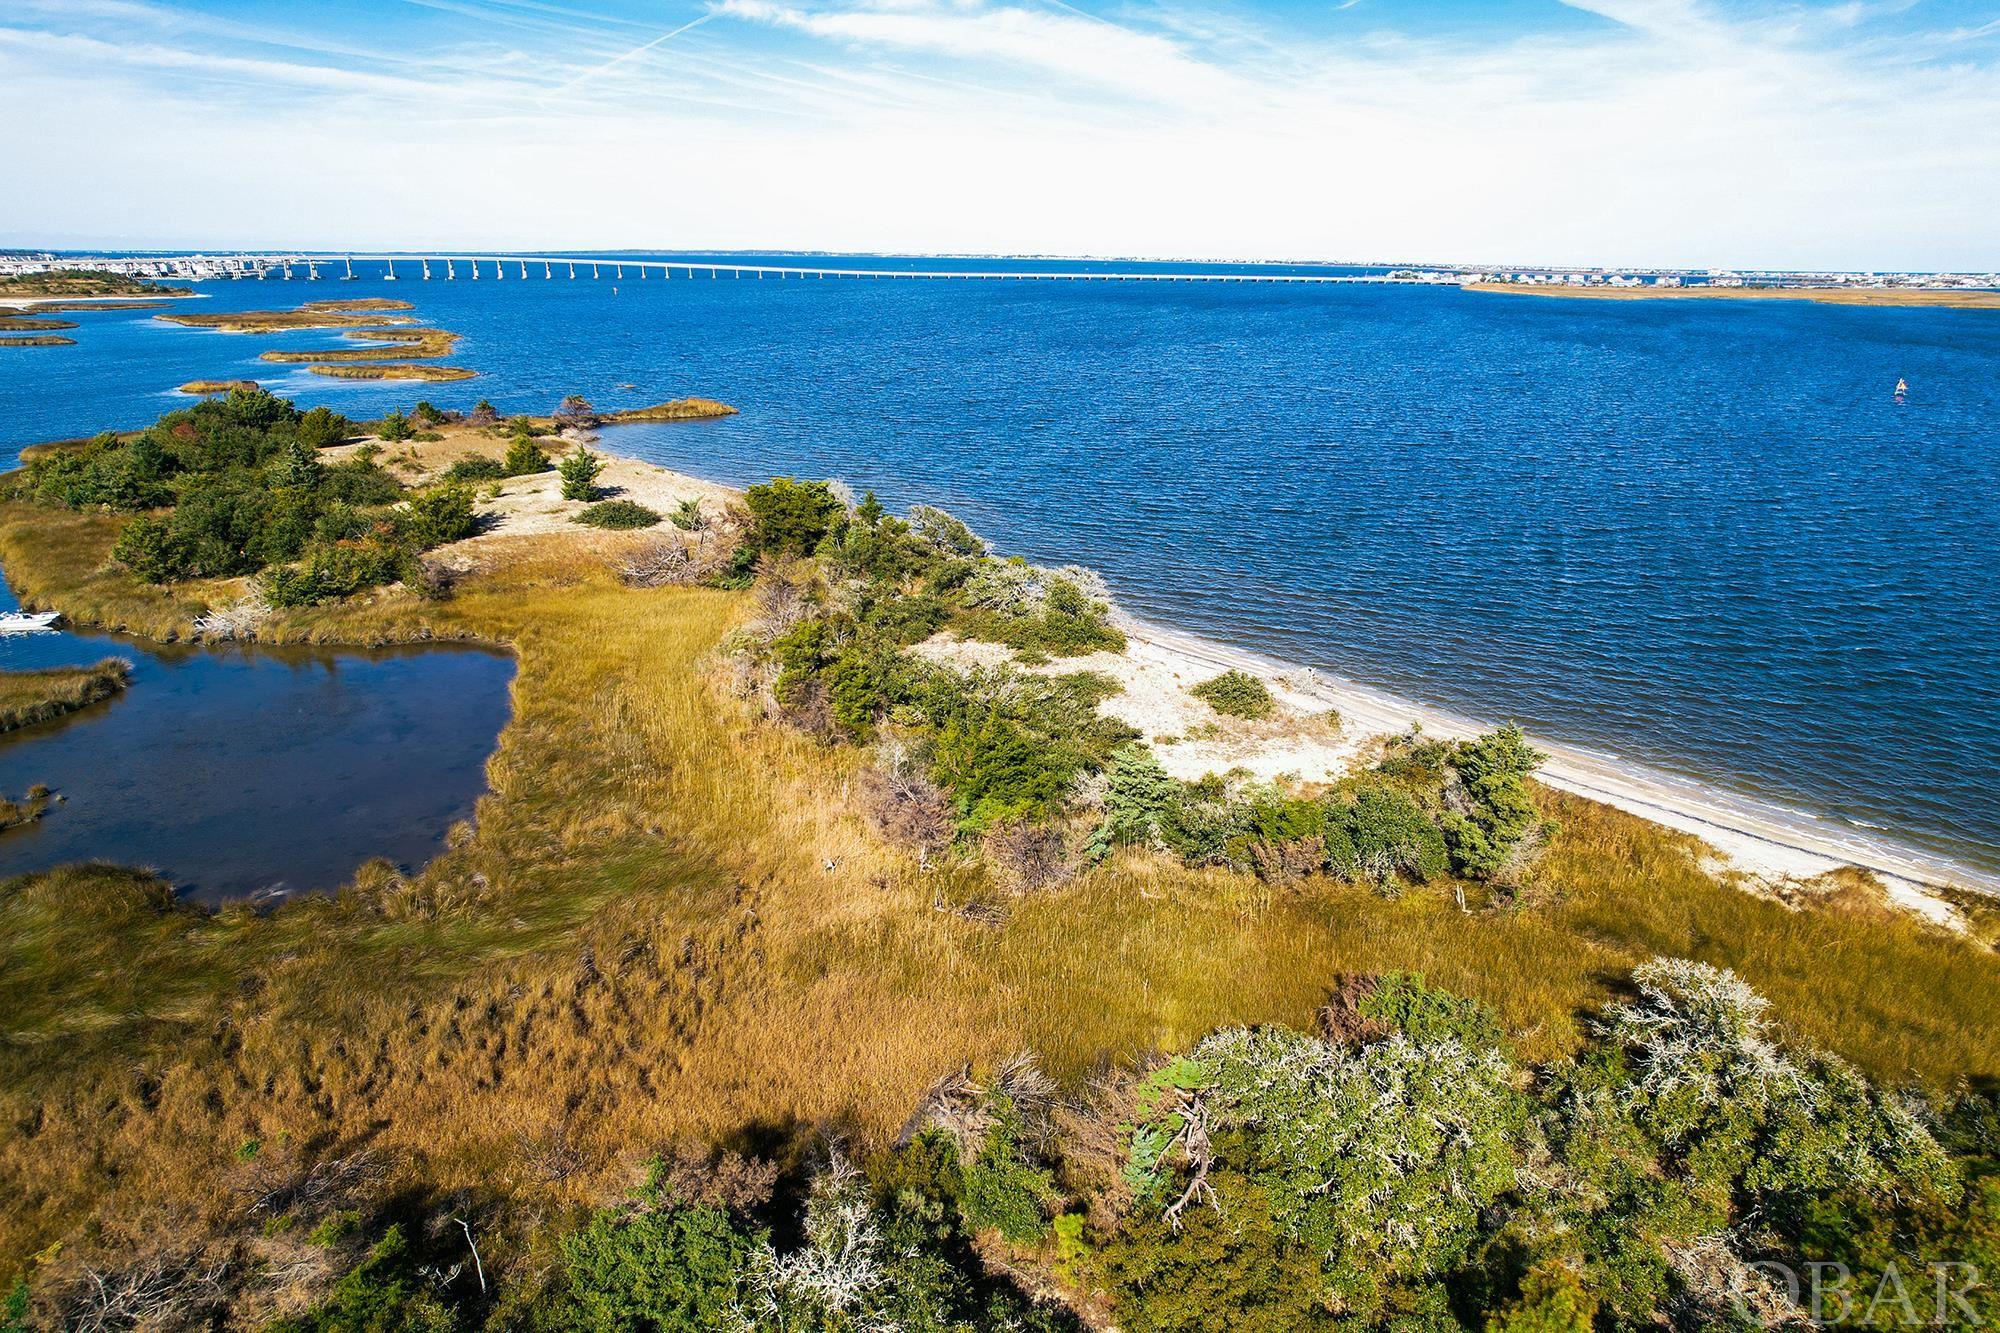 Waterfront and Private Living at its Finest...Just South of Pirates Cove and South of Virginia Dare Bridge makes this Lot Location Second to None. Viewable from the Bridge and a short distance to this Soundfront Lot on The Roanoke Sound. Peaceful and Private describes how you will live your Outer Banks Dream. Located on the Main Channel to Oregon Inlet where Dolphin Watching in your front yard is a daily Occurrence, you will wake up every day needing to be pinched. Call to schedule your private tour of the Carolina Cays   For Outer Banks lovers it will never get better than this.